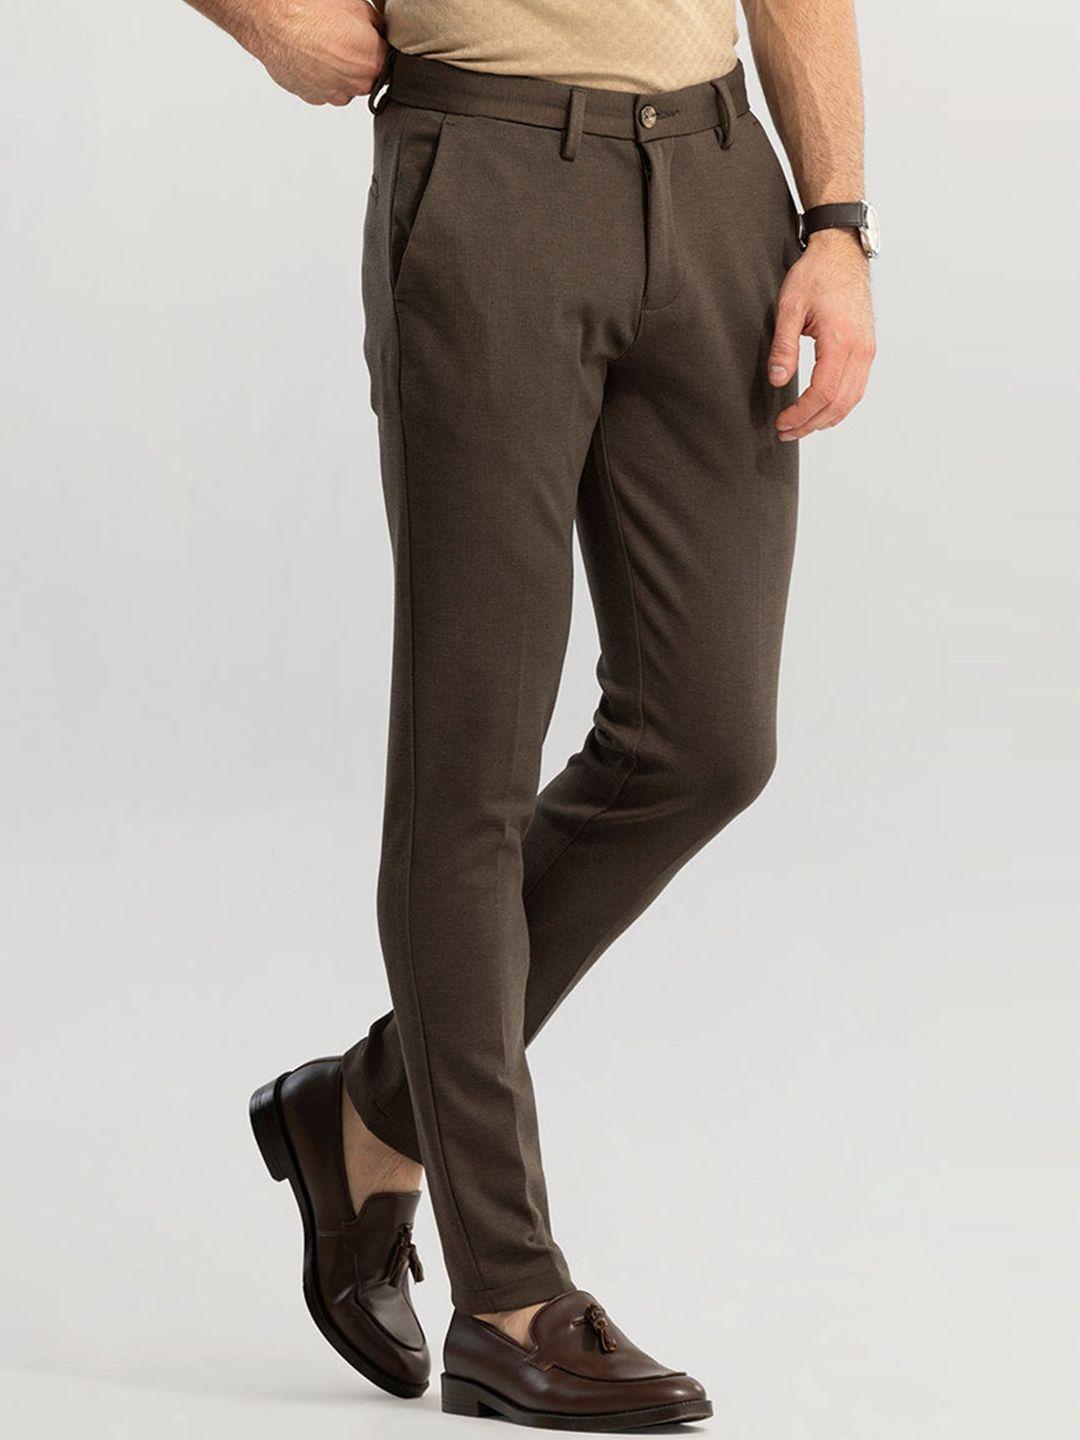 snitch men olive green slim fit chinos trousers